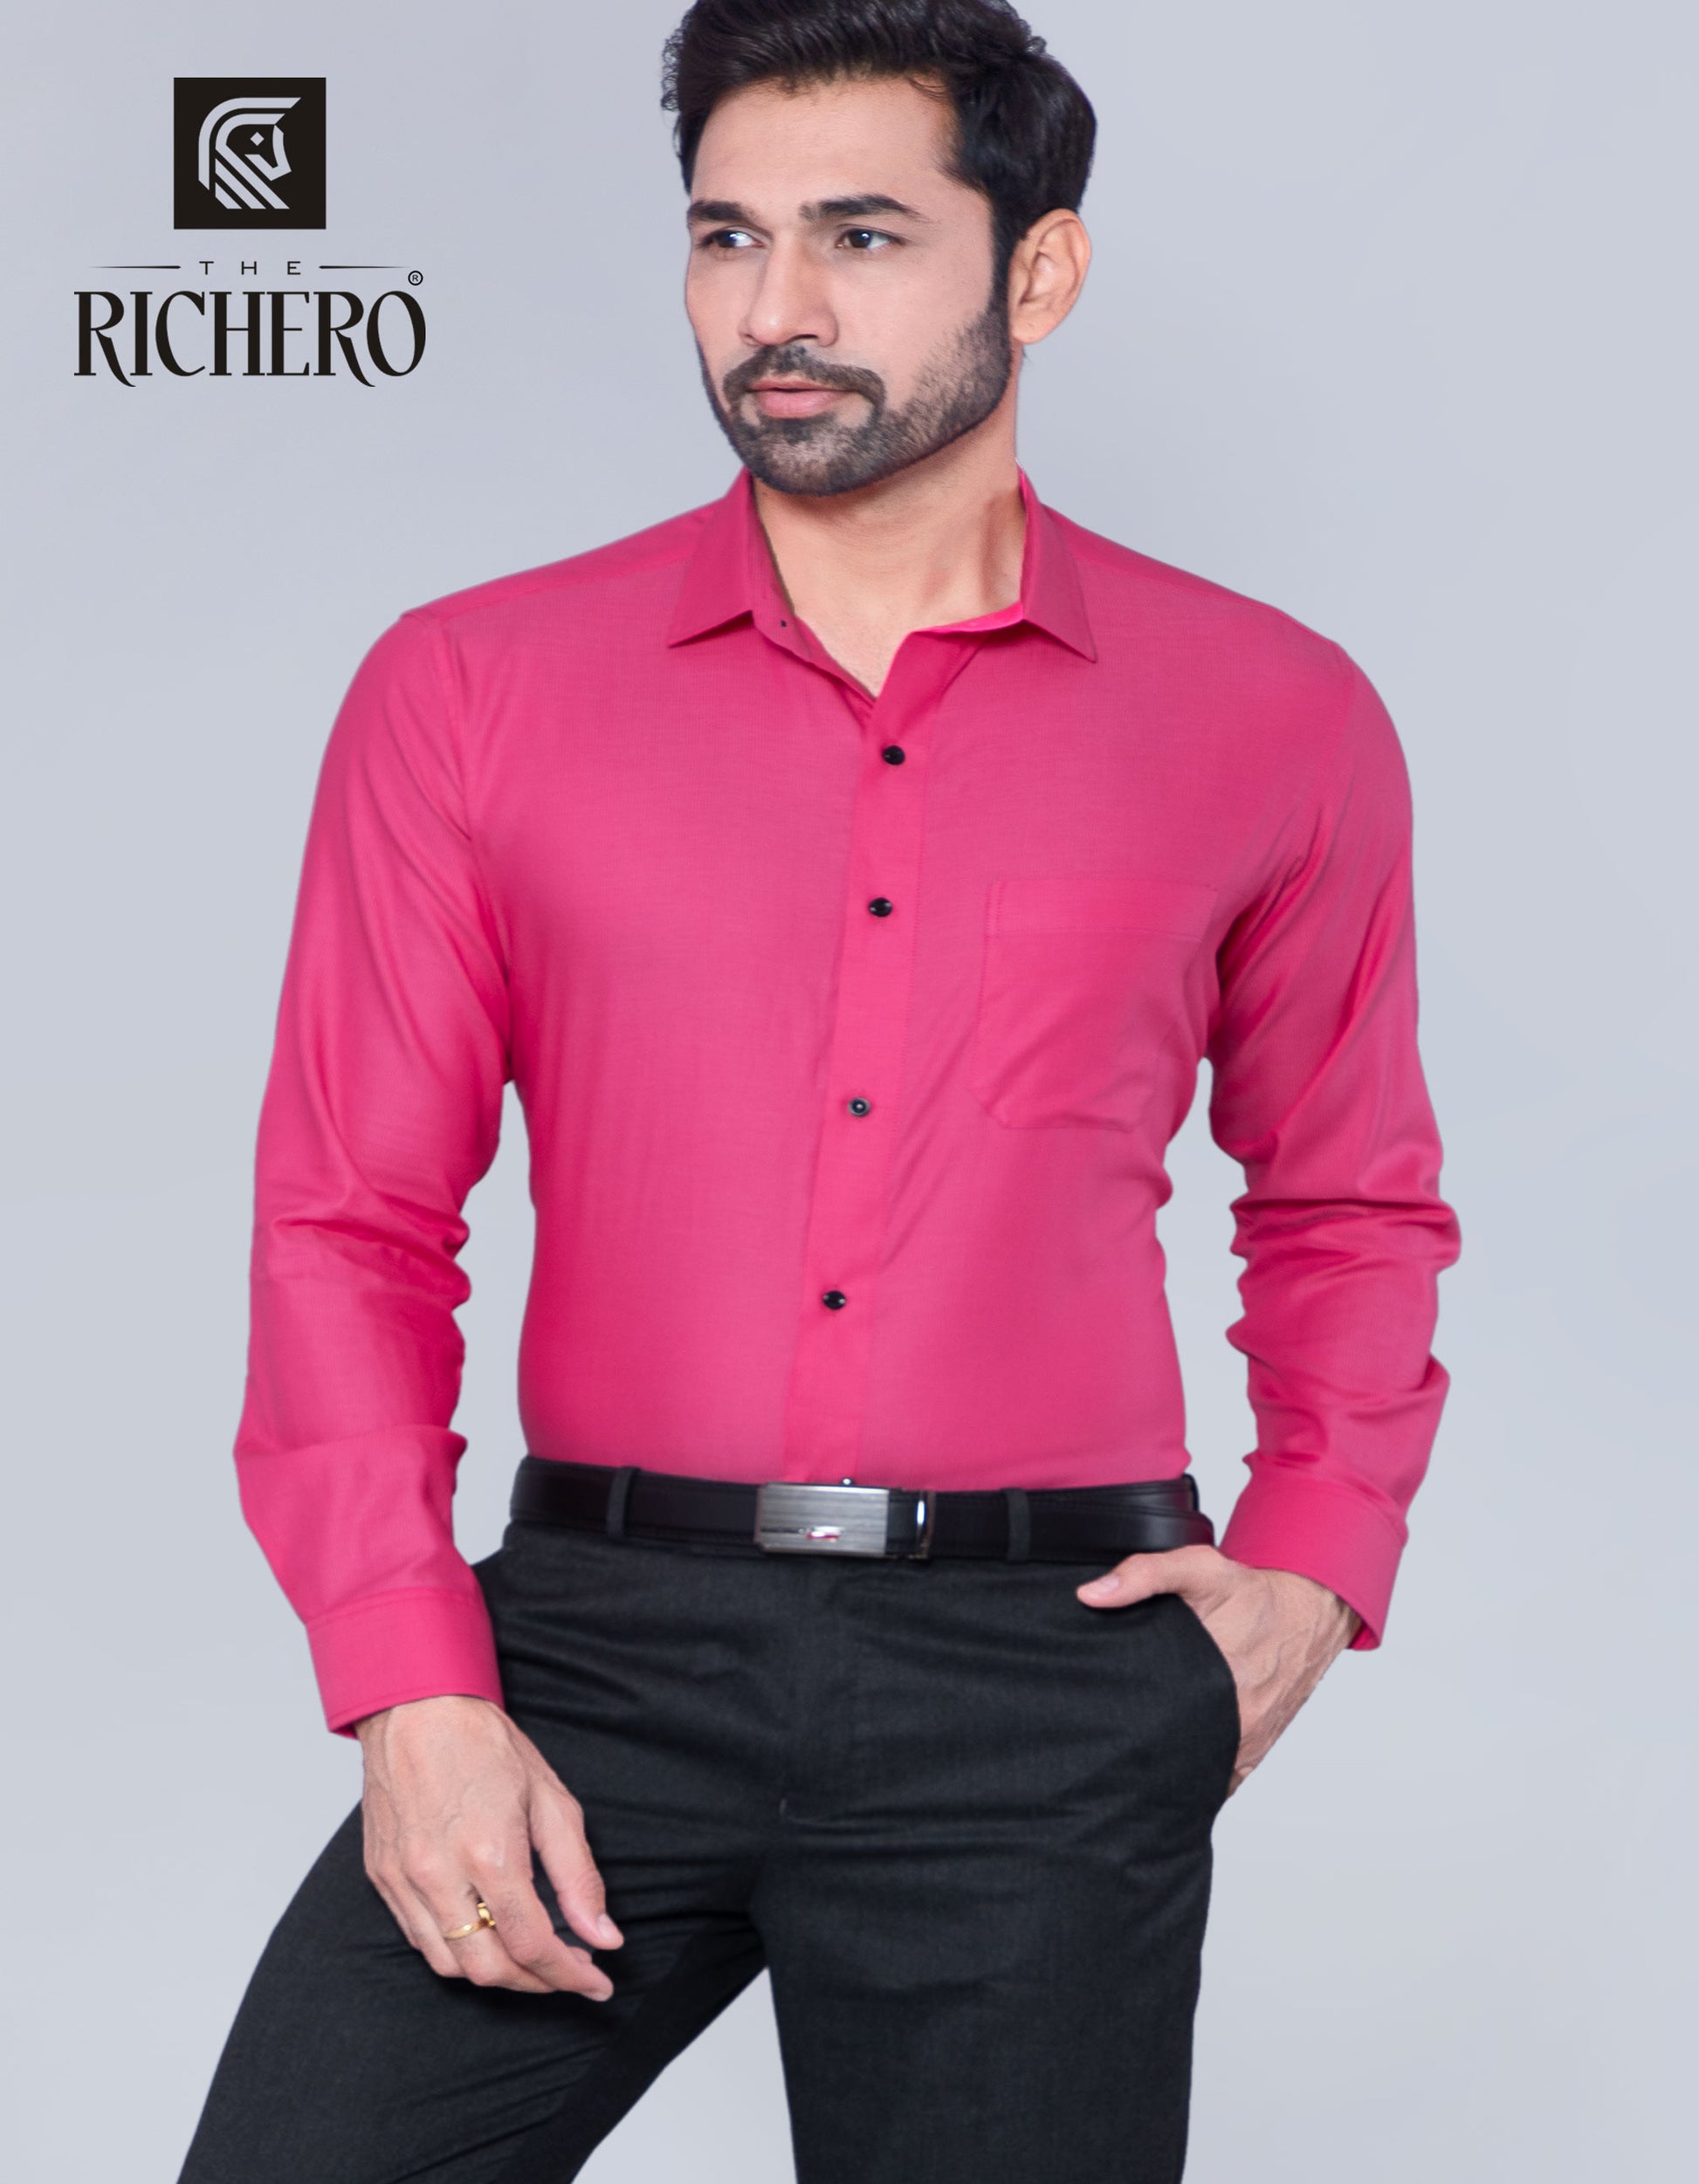 Men's Sizzling Pink Shirt made of Piper Club Cotton